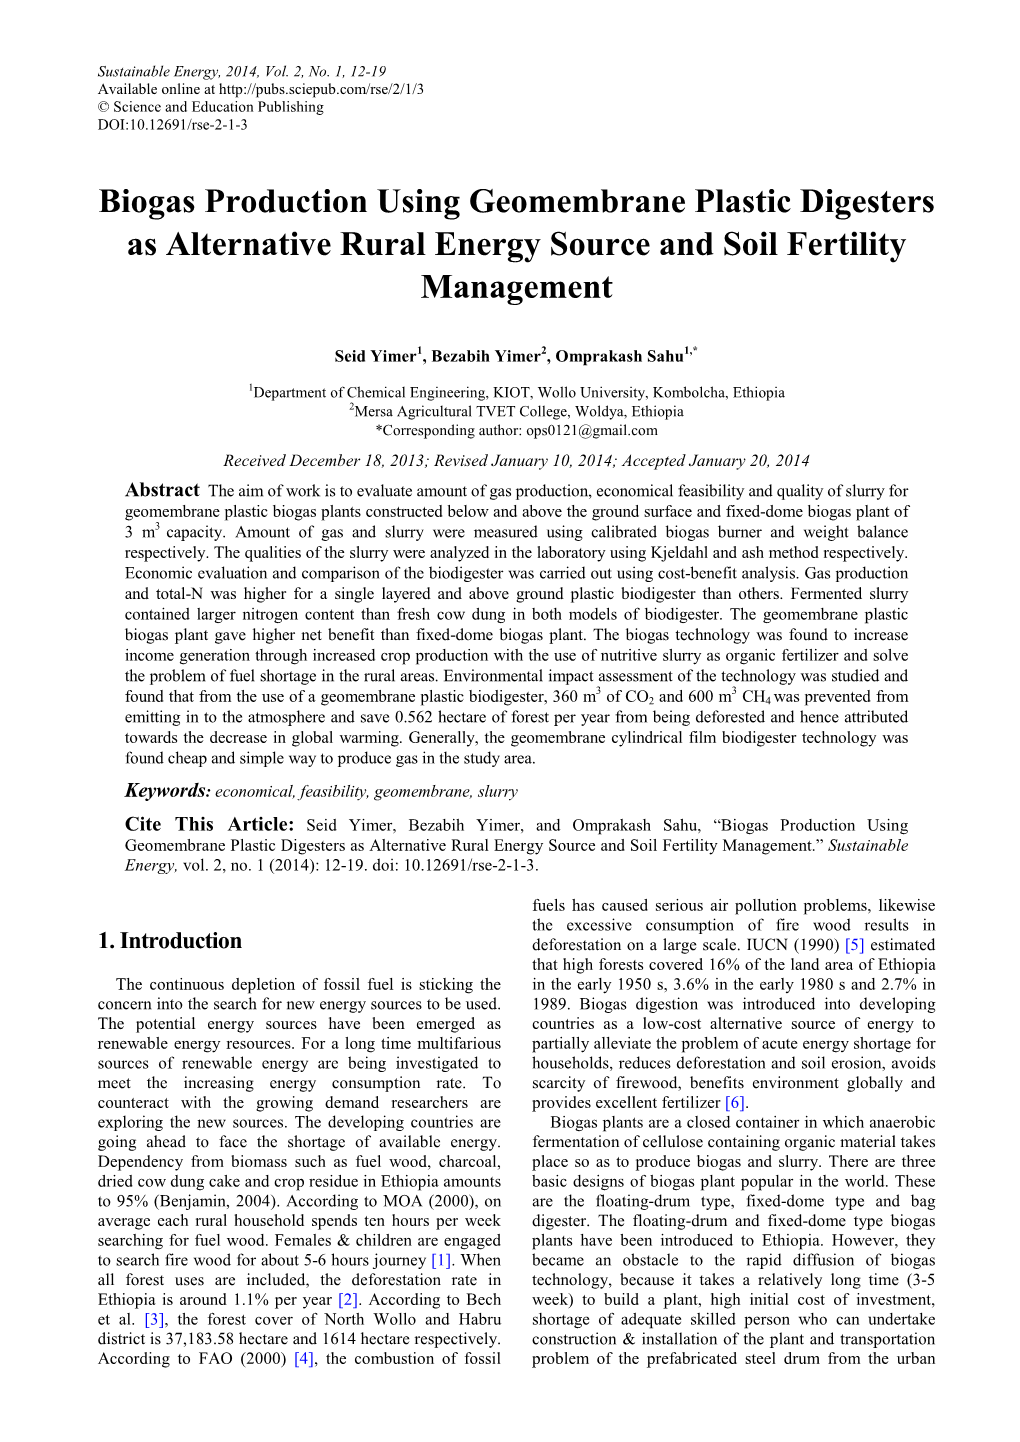 Biogas Production Using Geomembrane Plastic Digesters As Alternative Rural Energy Source and Soil Fertility Management